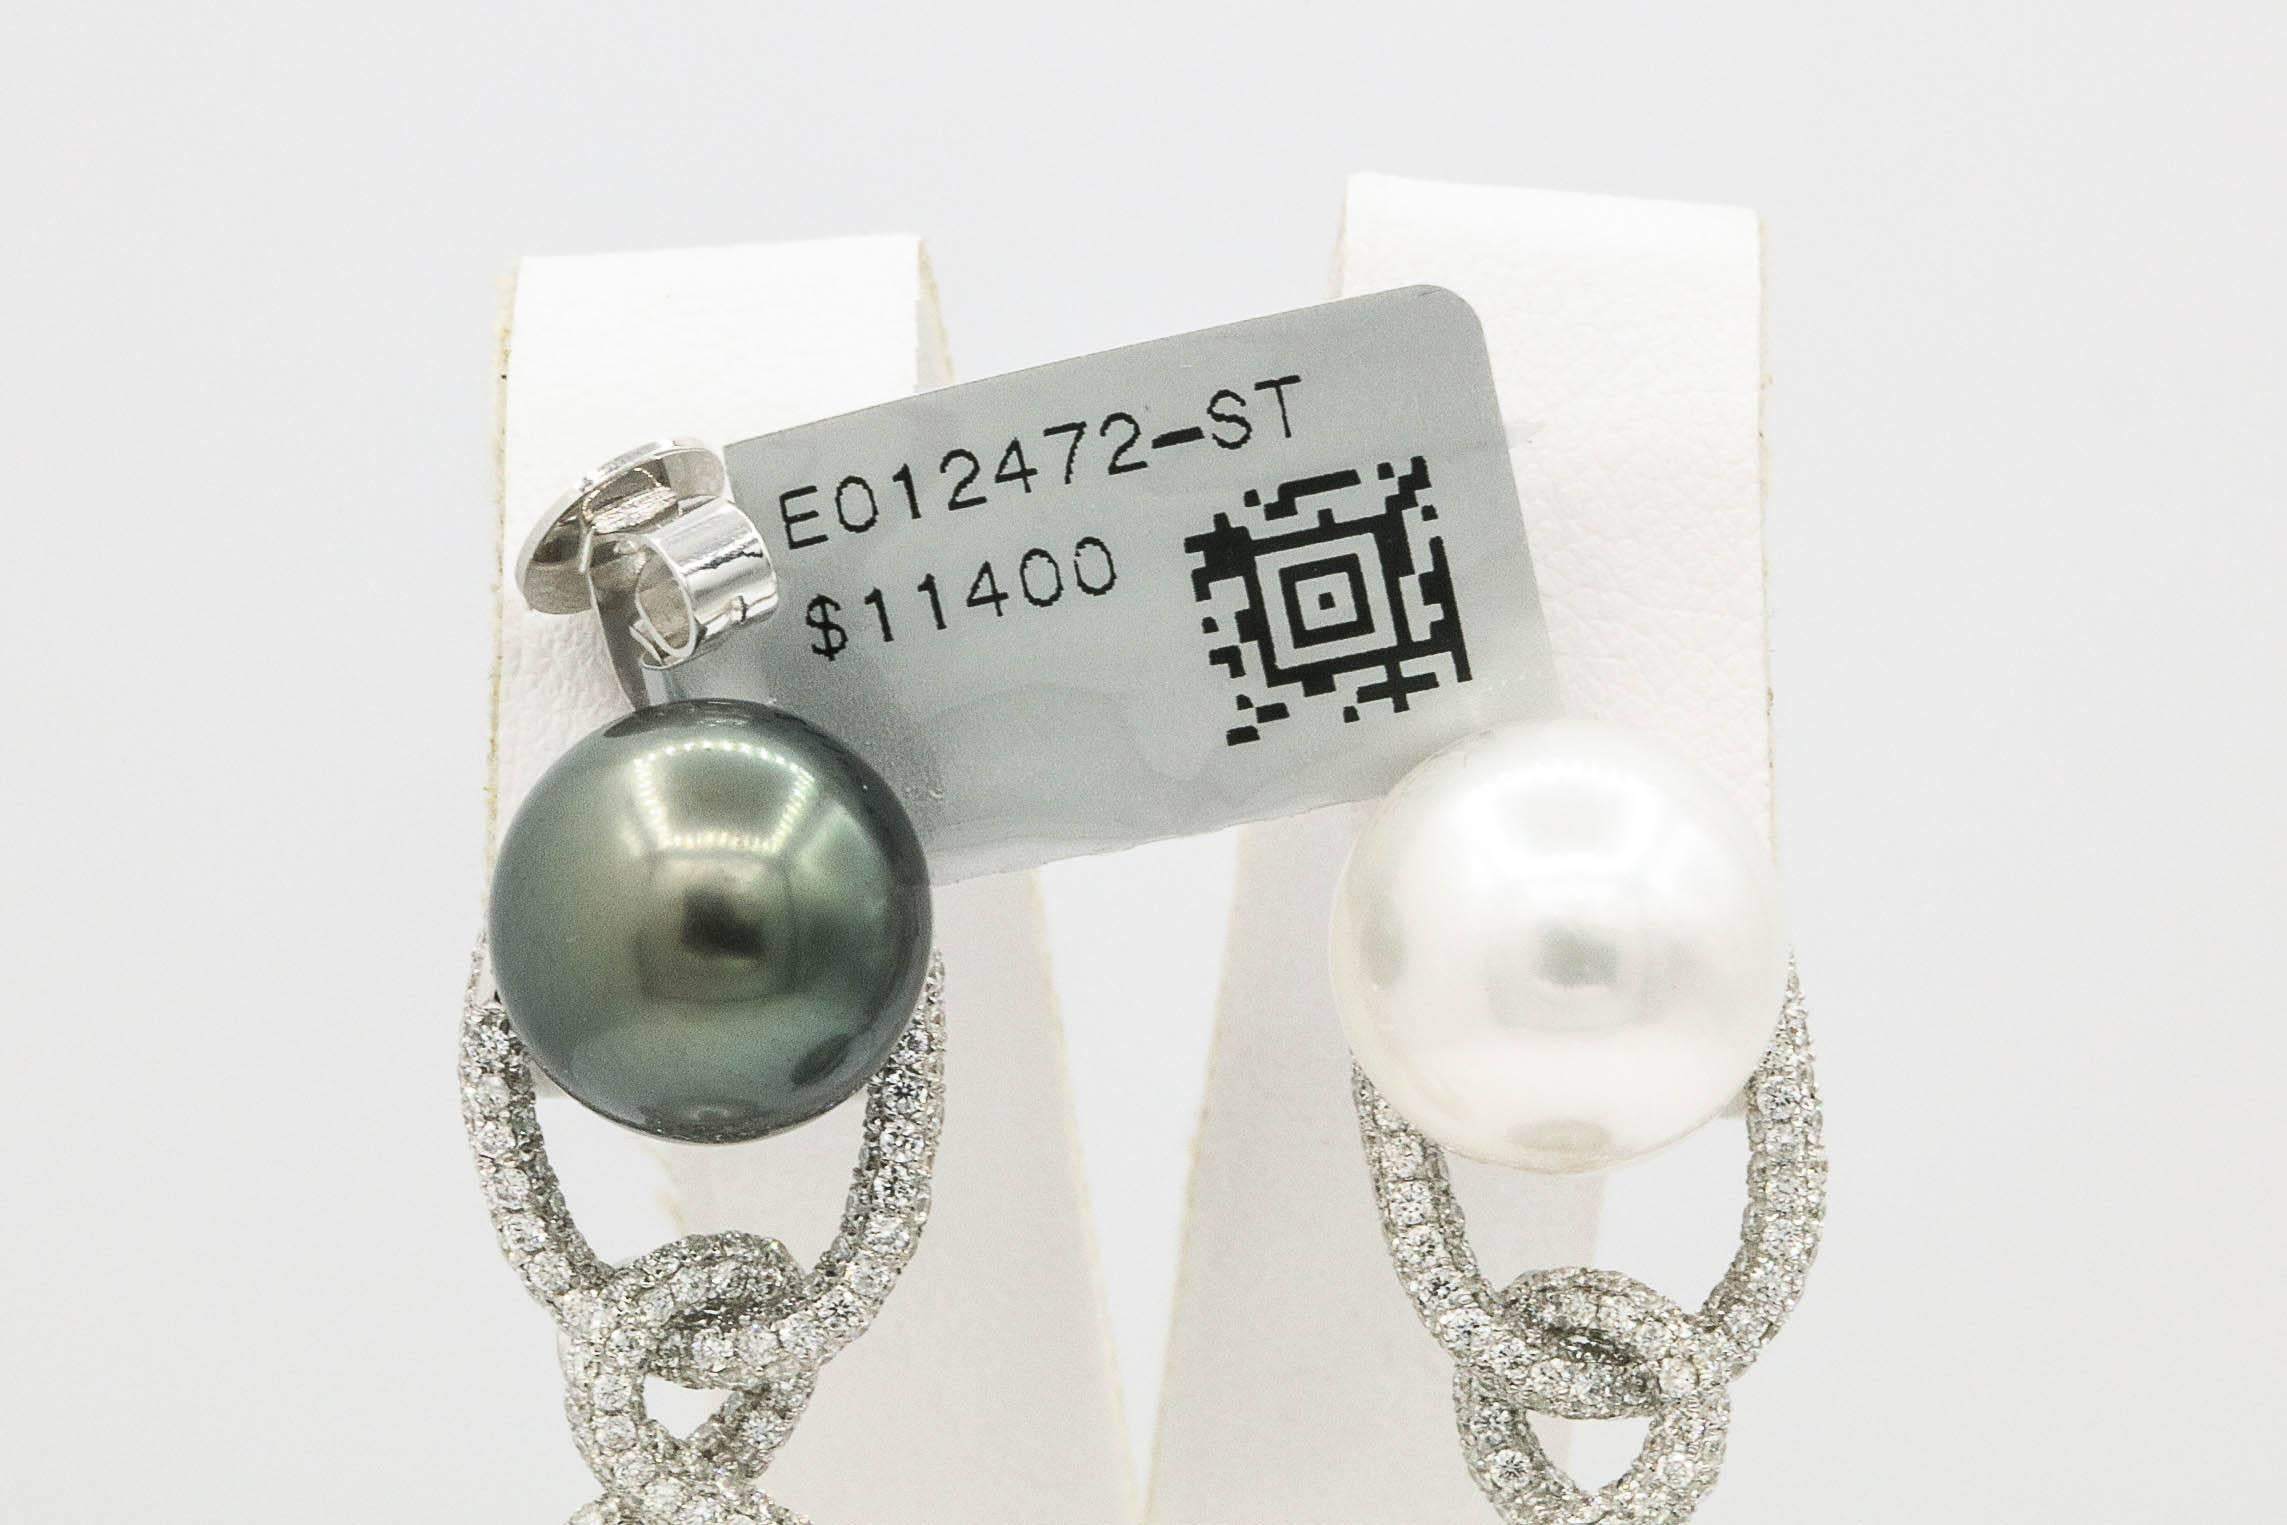 18K White gold white South Sea and Tahitian pearls measuring 11-13 mm with round diamonds weighing 1.90 carats. Color G-H Clarity SI